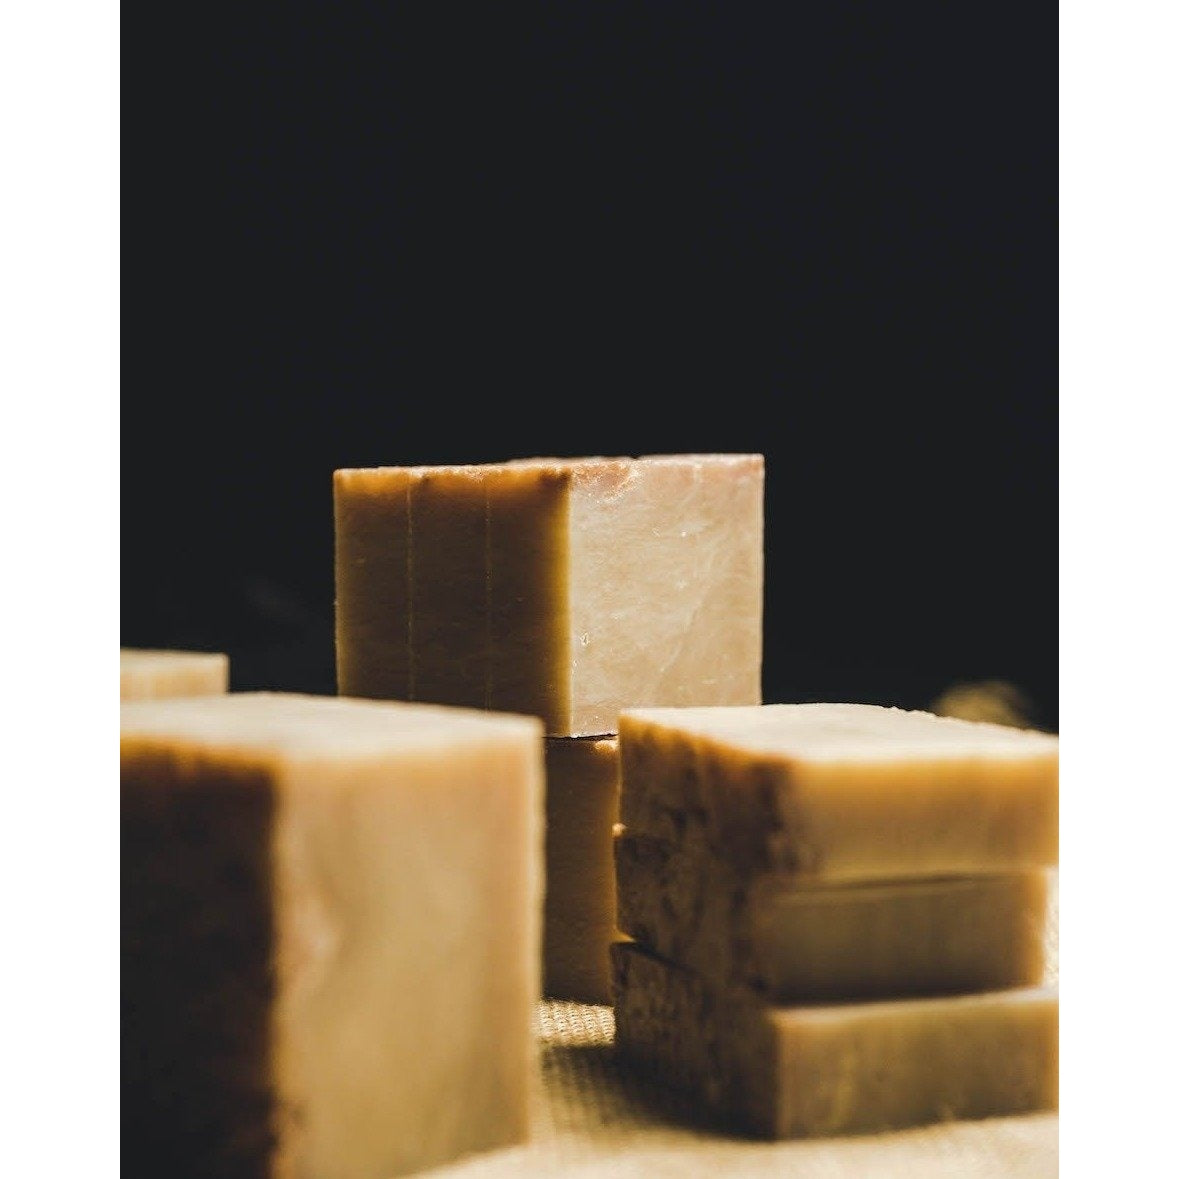 Iron Lions Soap - Coco(3)Nut